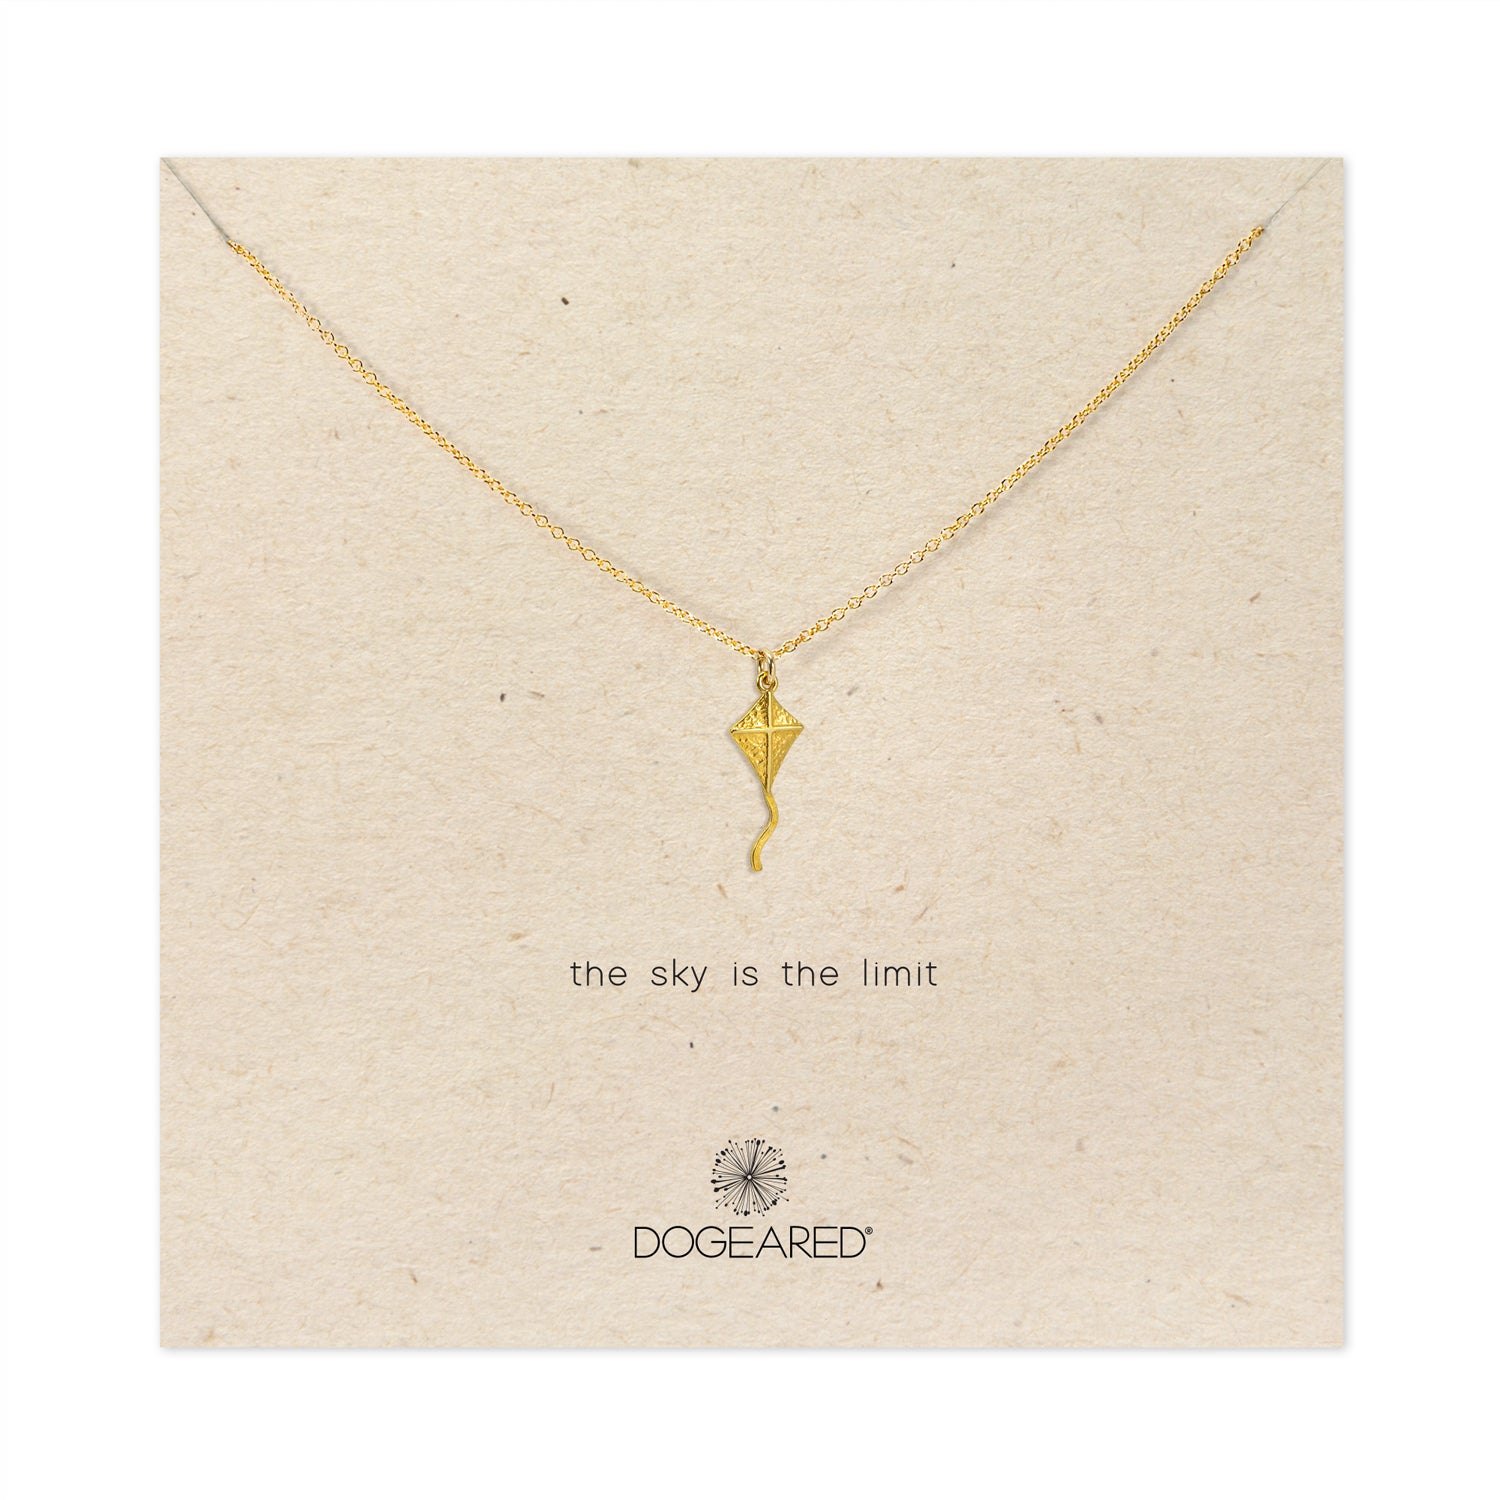 the sky is the limit kite necklace